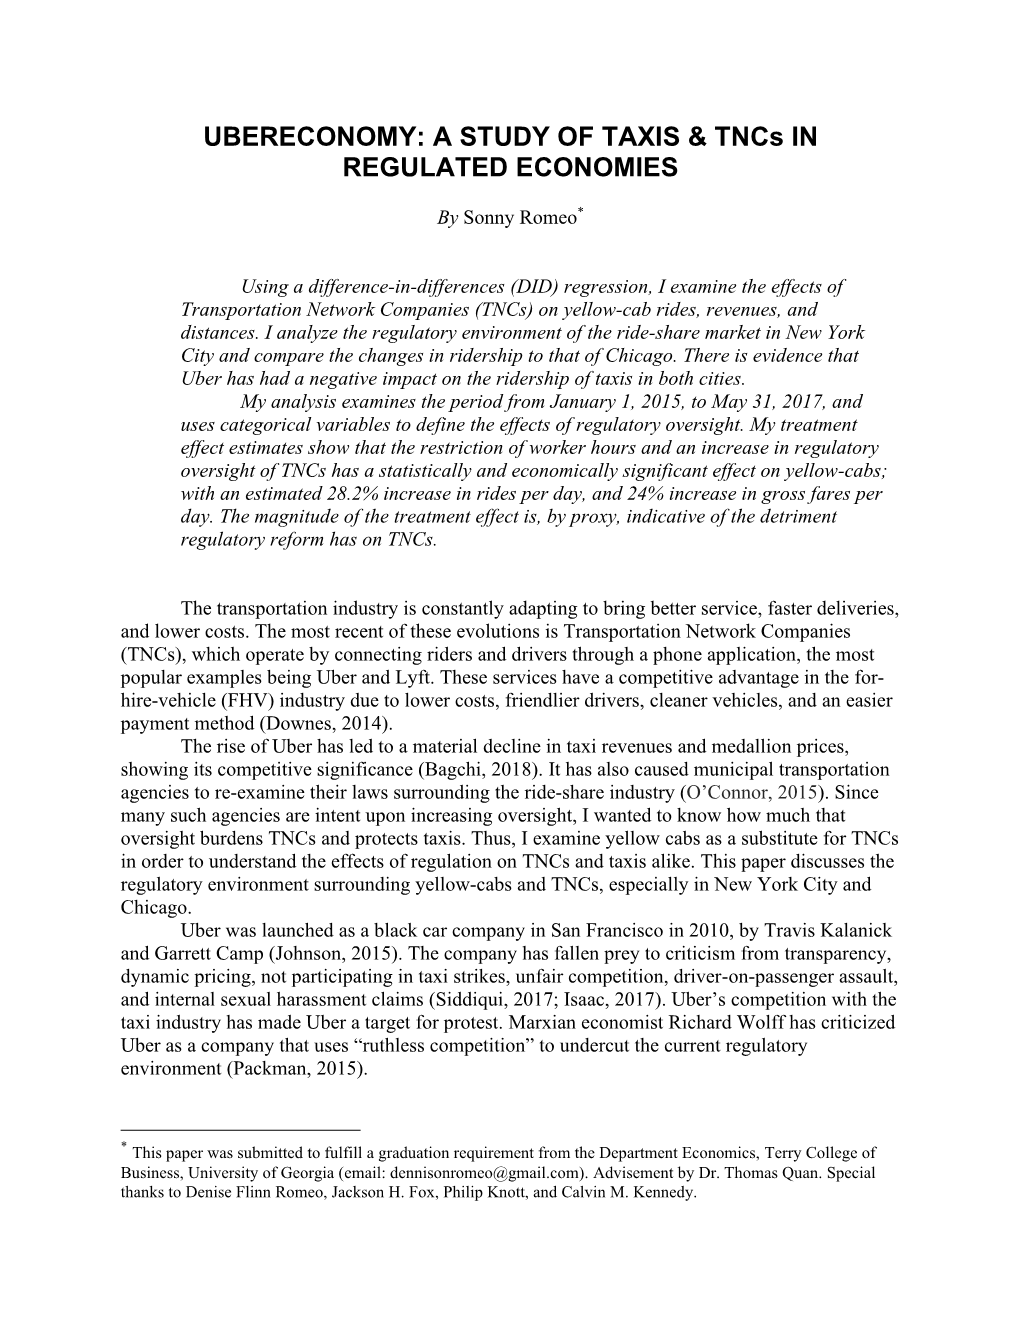 A STUDY of TAXIS & Tncs in REGULATED ECONOMIES